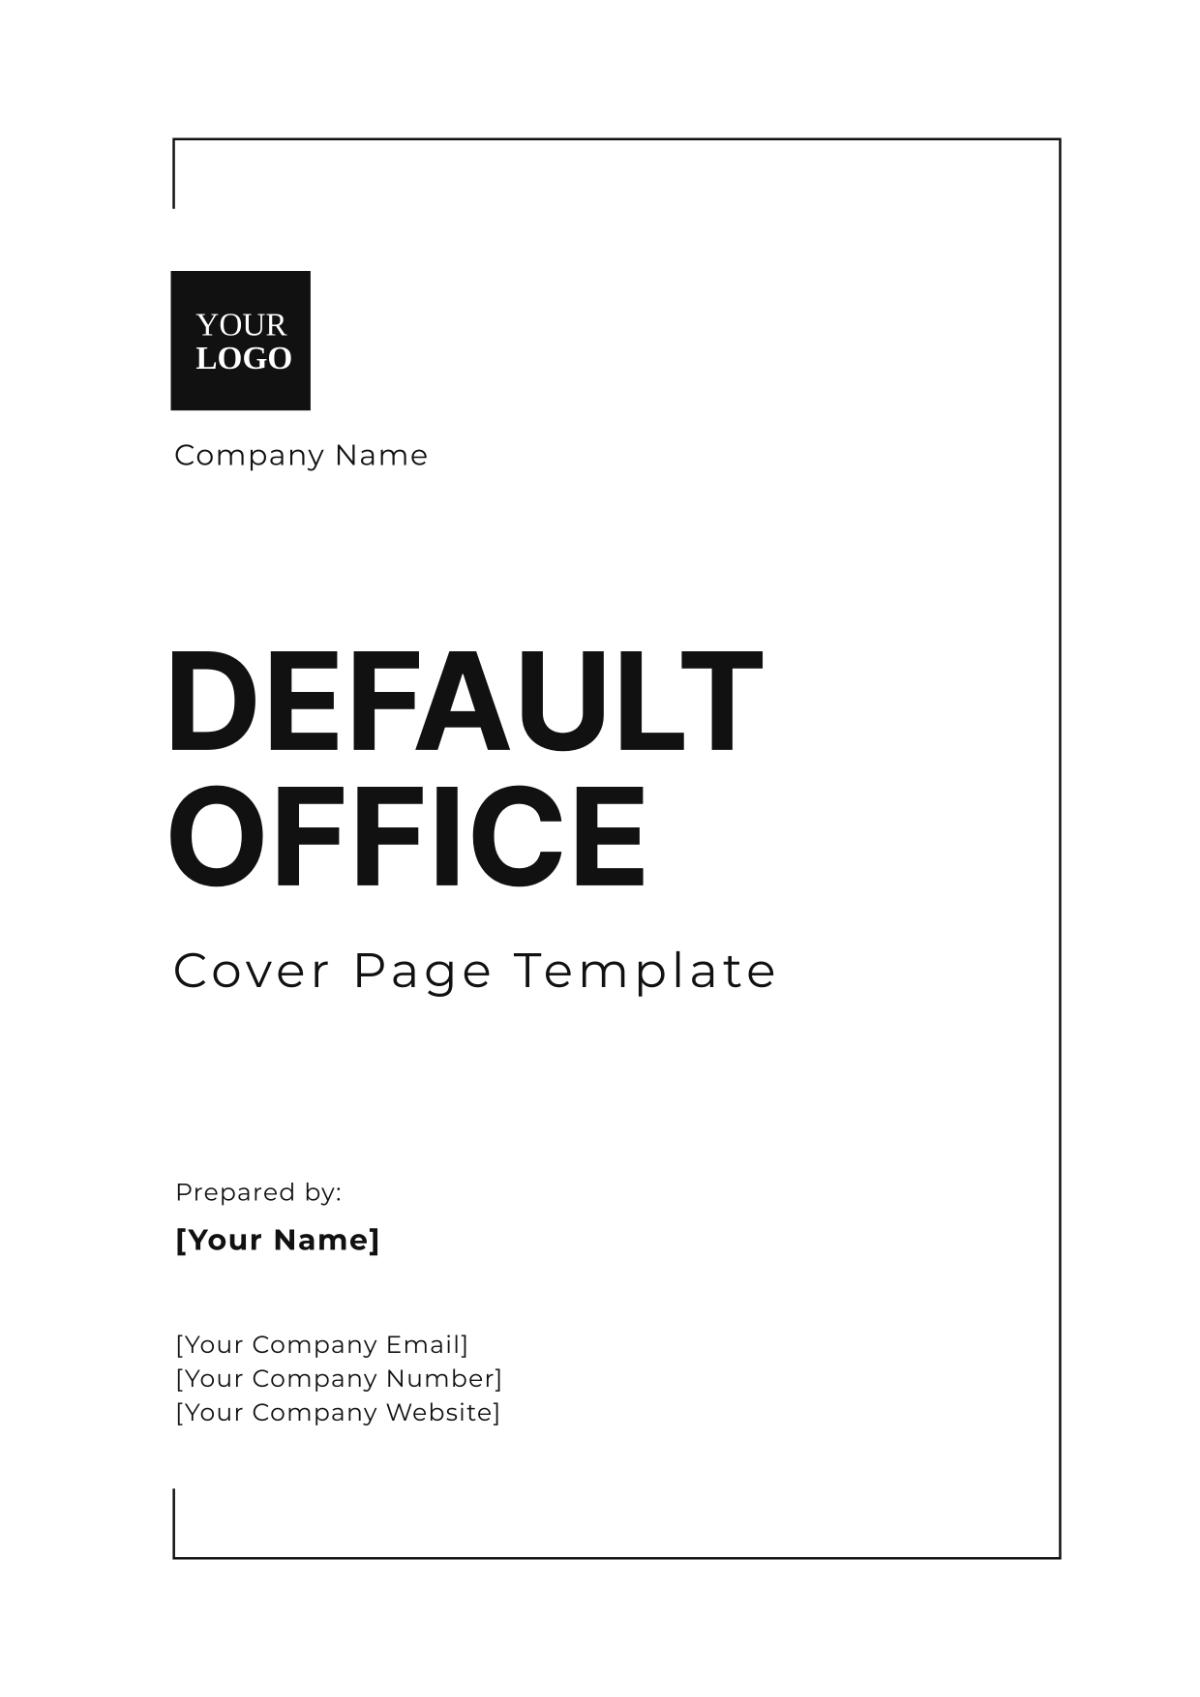 Default Office Cover Page